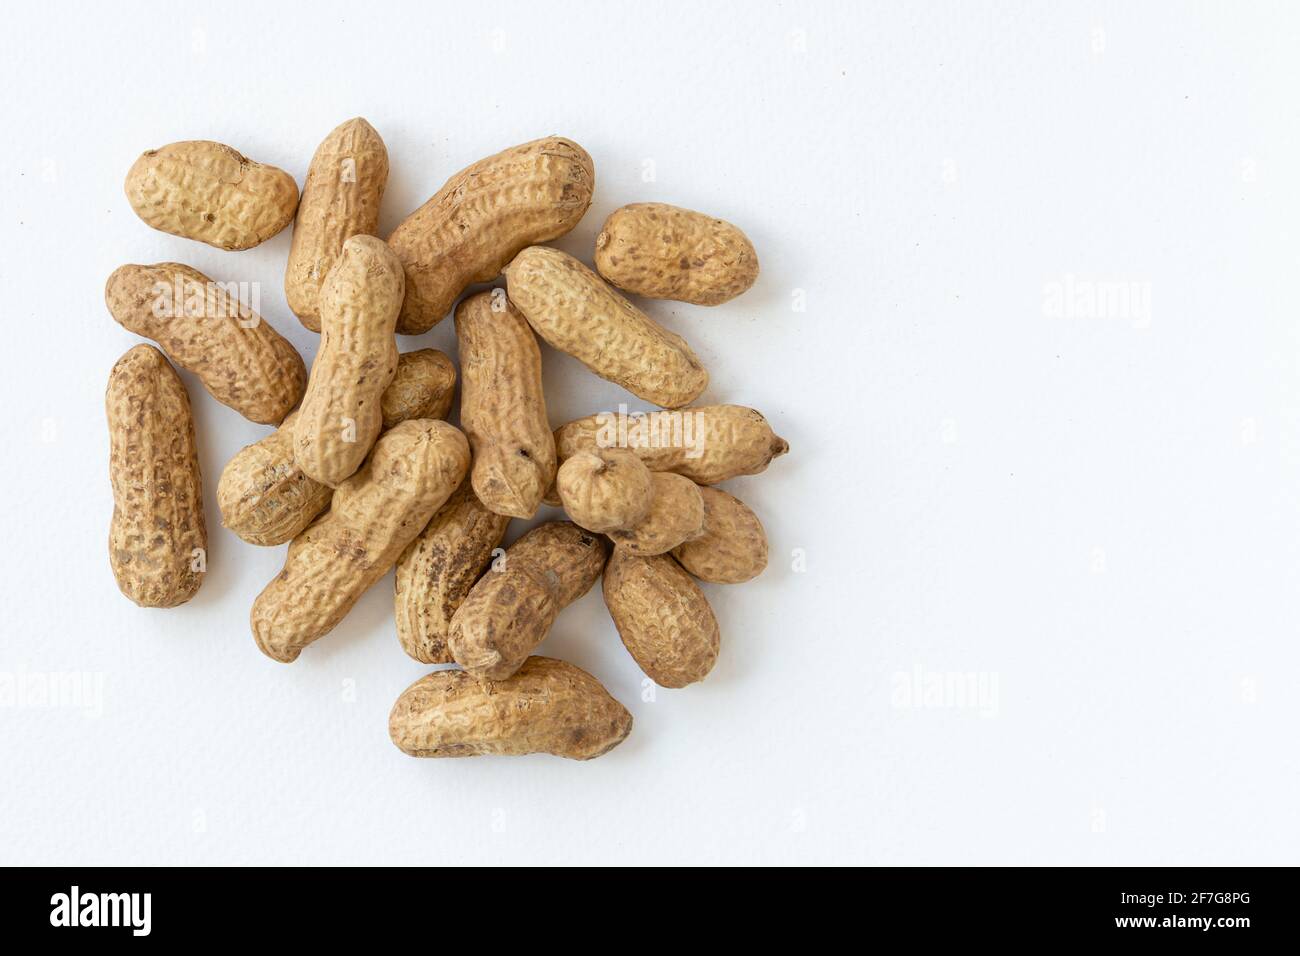 Peanuts or groundnuts in shells, isolated on white background. Unshelled nuts. Stock Photo